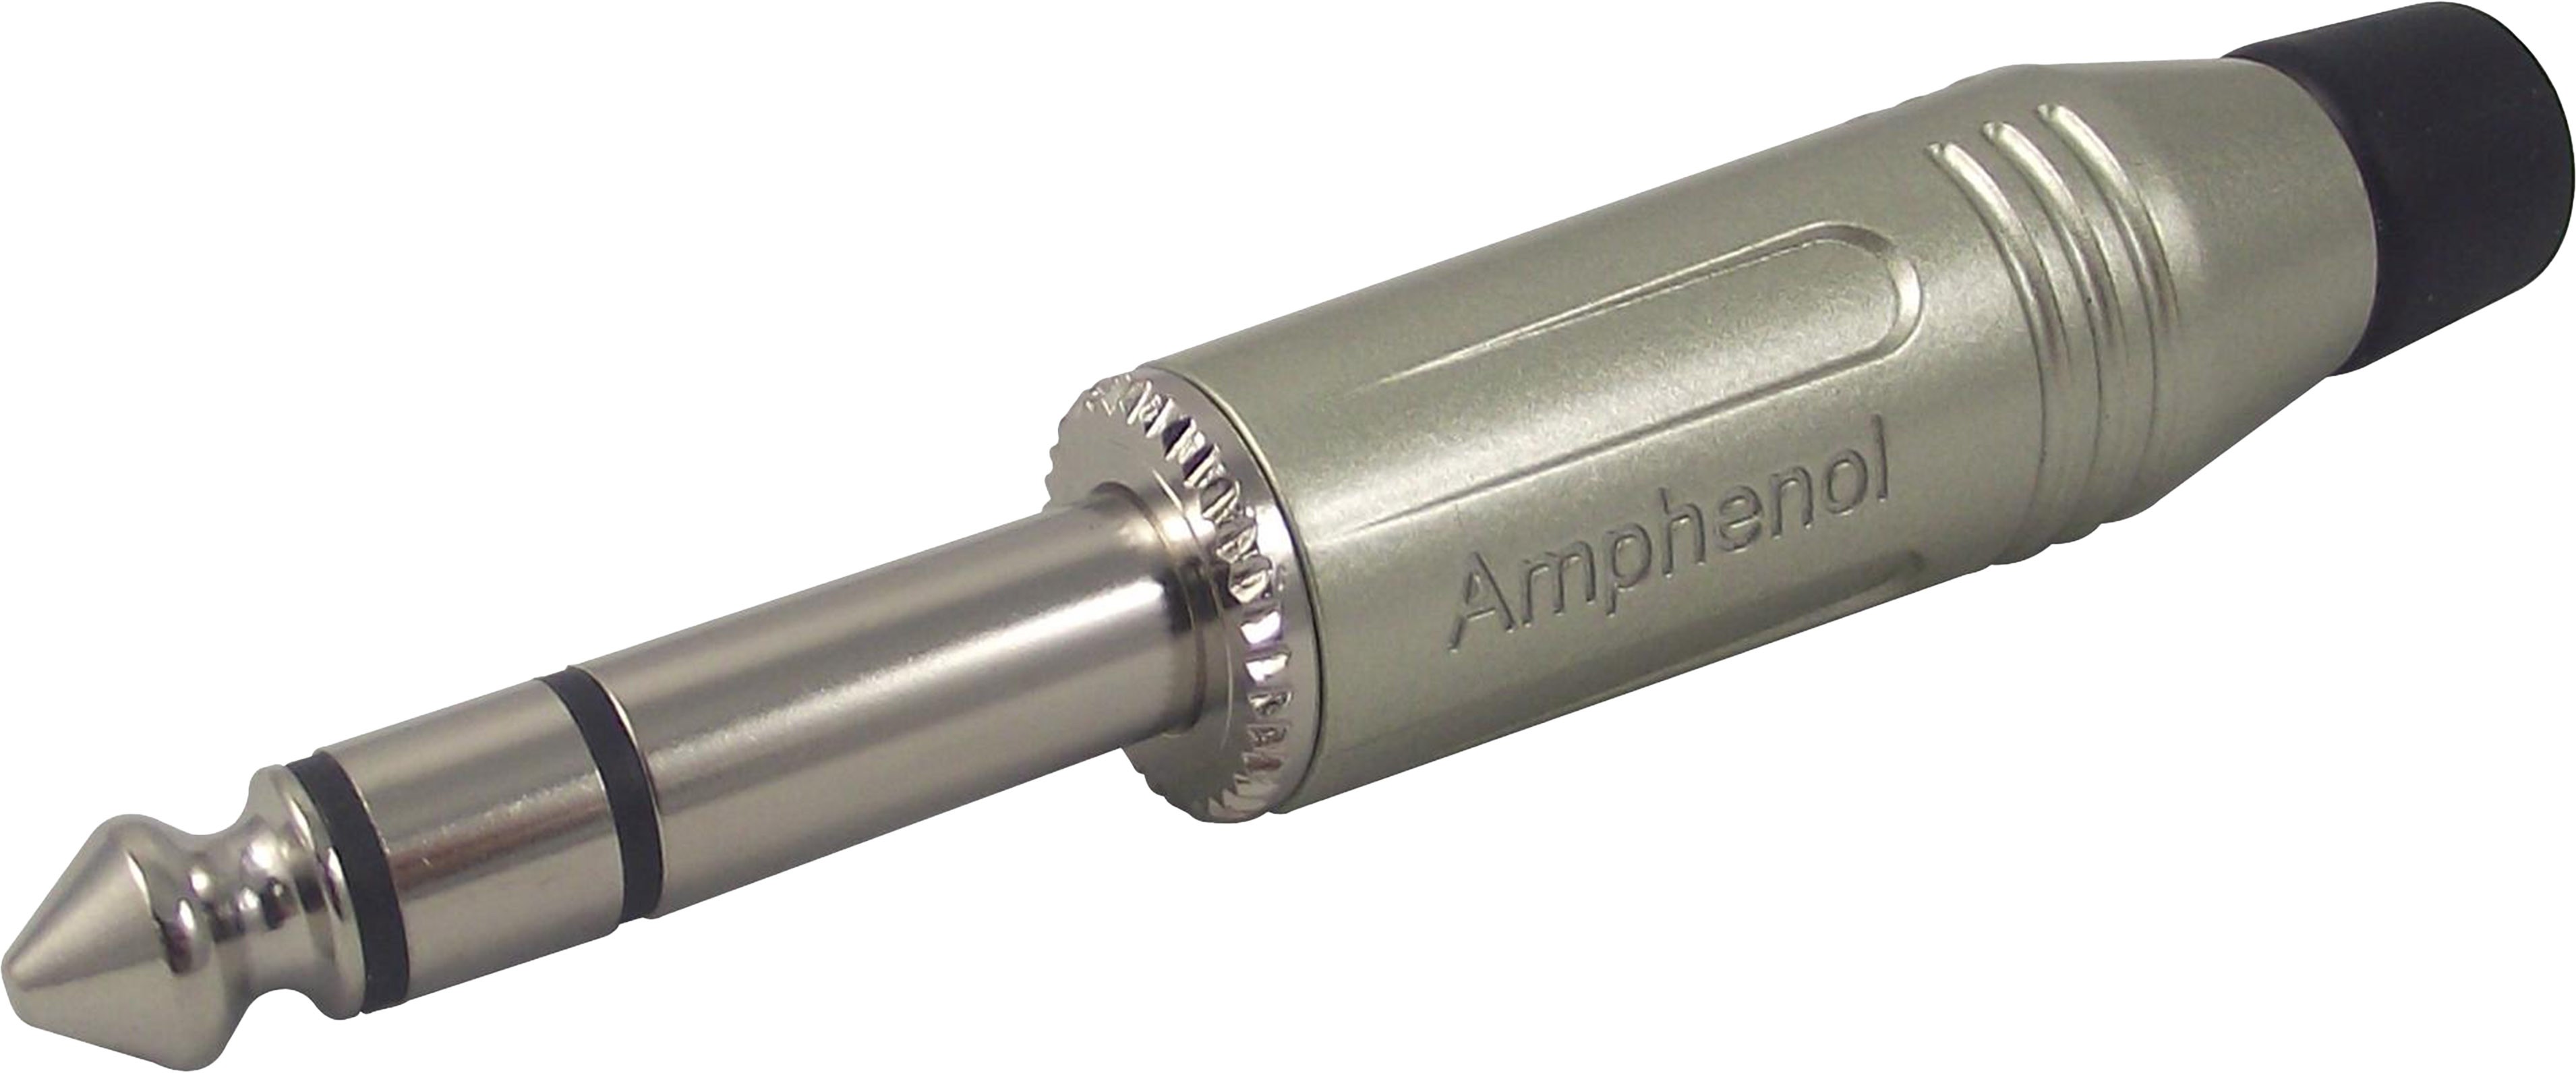 AMPHENOL ACPS-GN Male Stereo Jack 6.35mm Connector Ø7mm